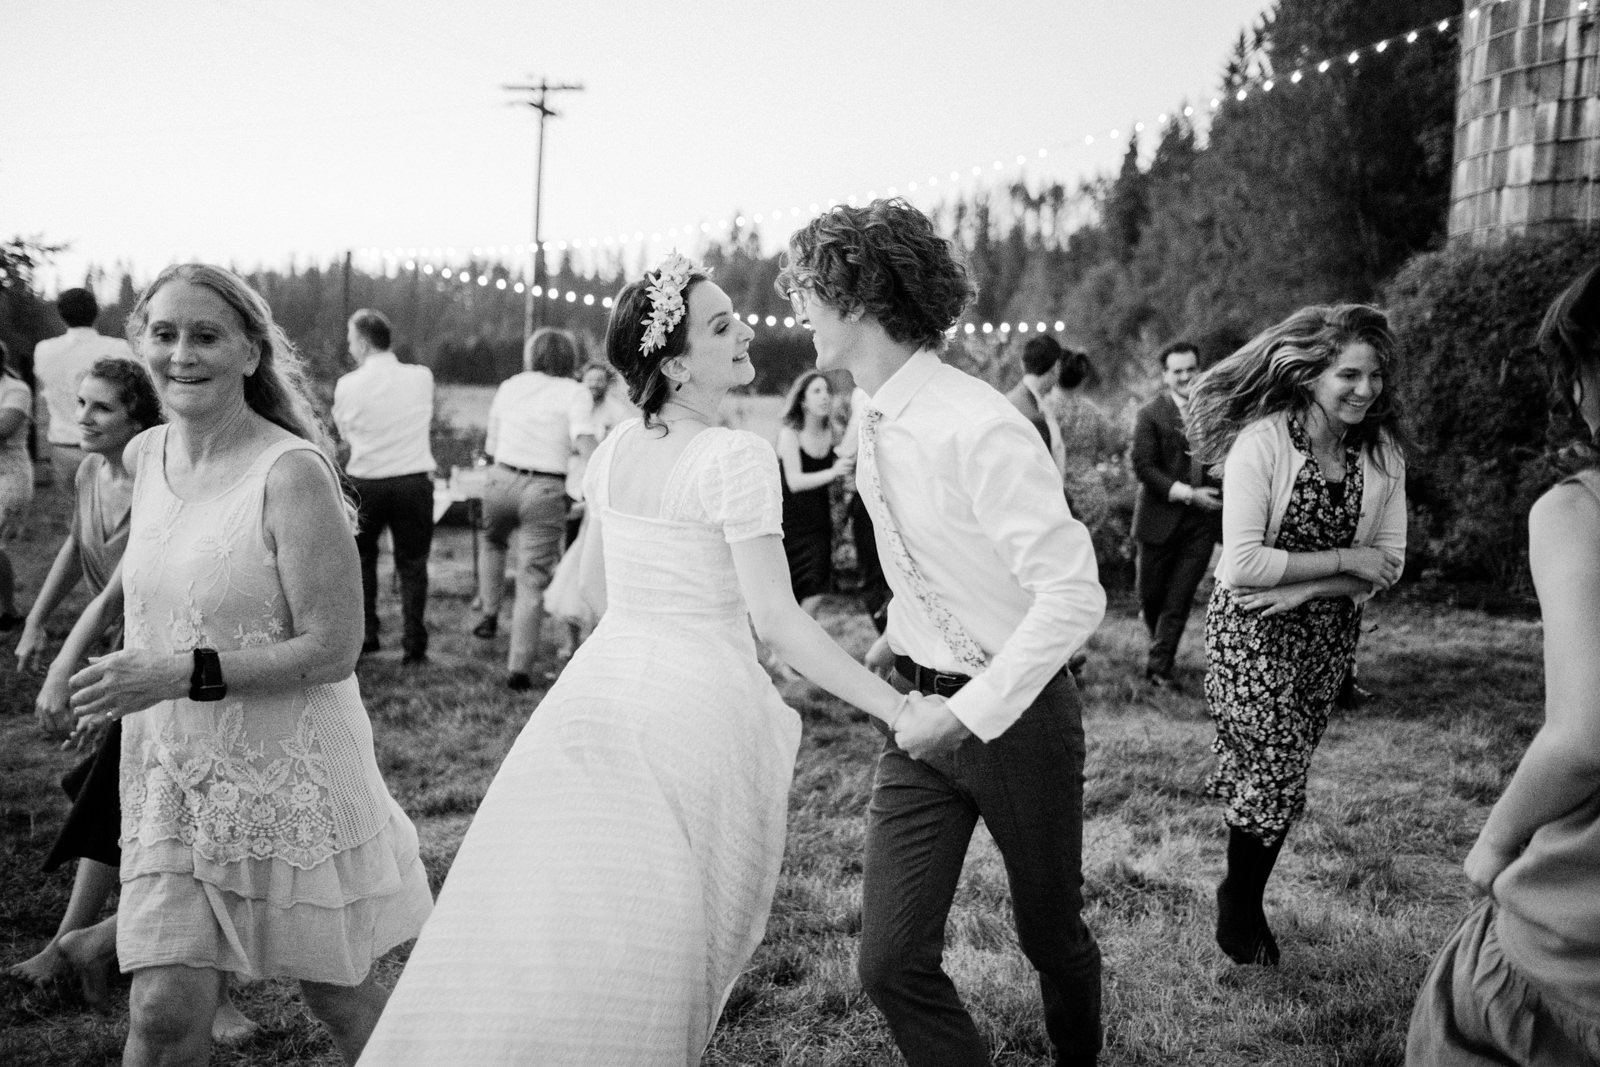  Bride and groom twirl and dance in black and white candid photo 